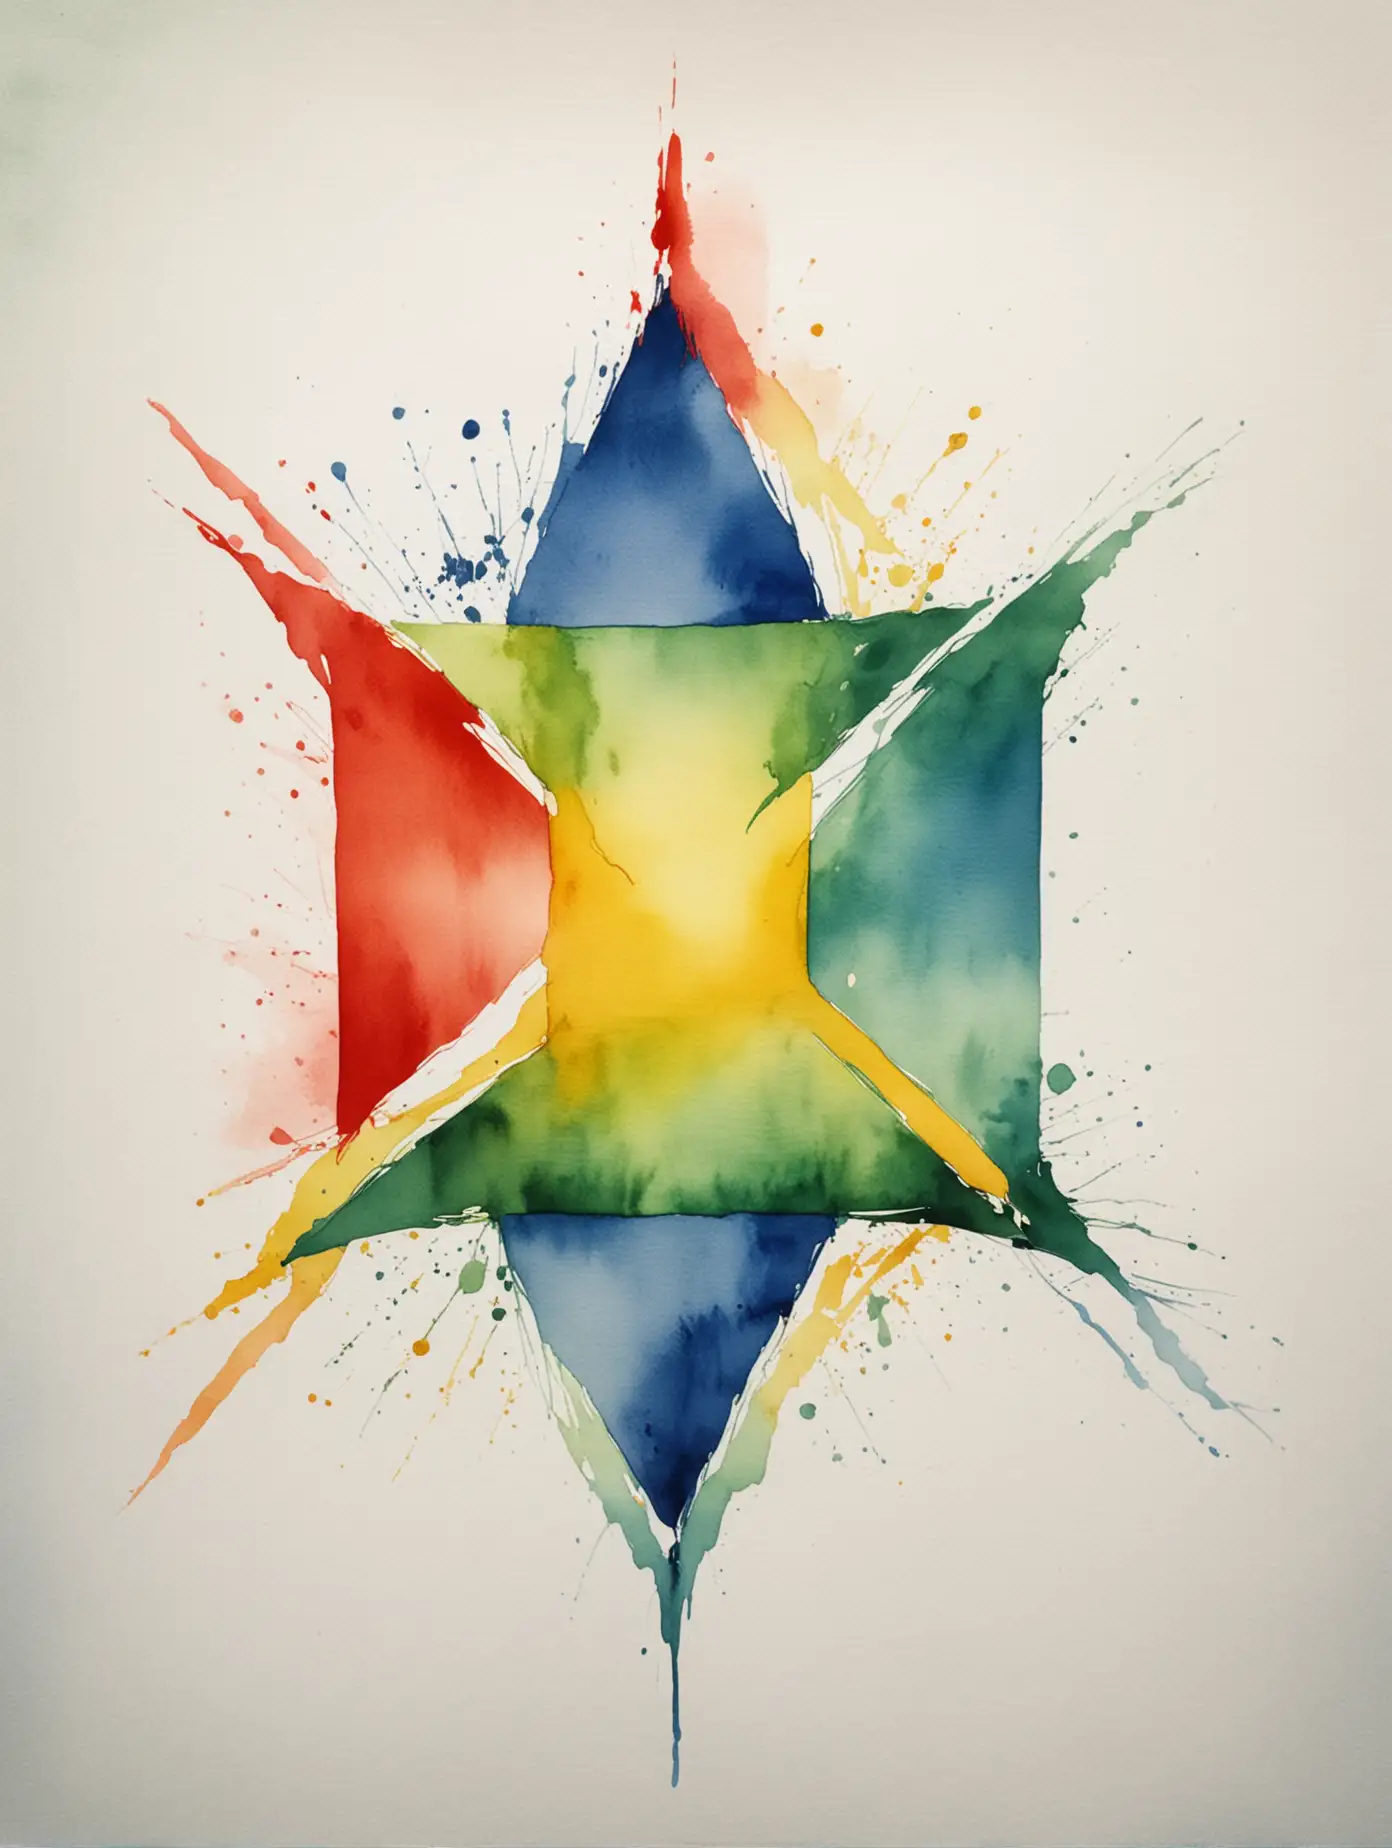 A single, captivating red, blue, yellow and green clean, artistic, symbolic, colorful, expressive, minimalist, watercolor, illustration of a foreign, abstract symbol